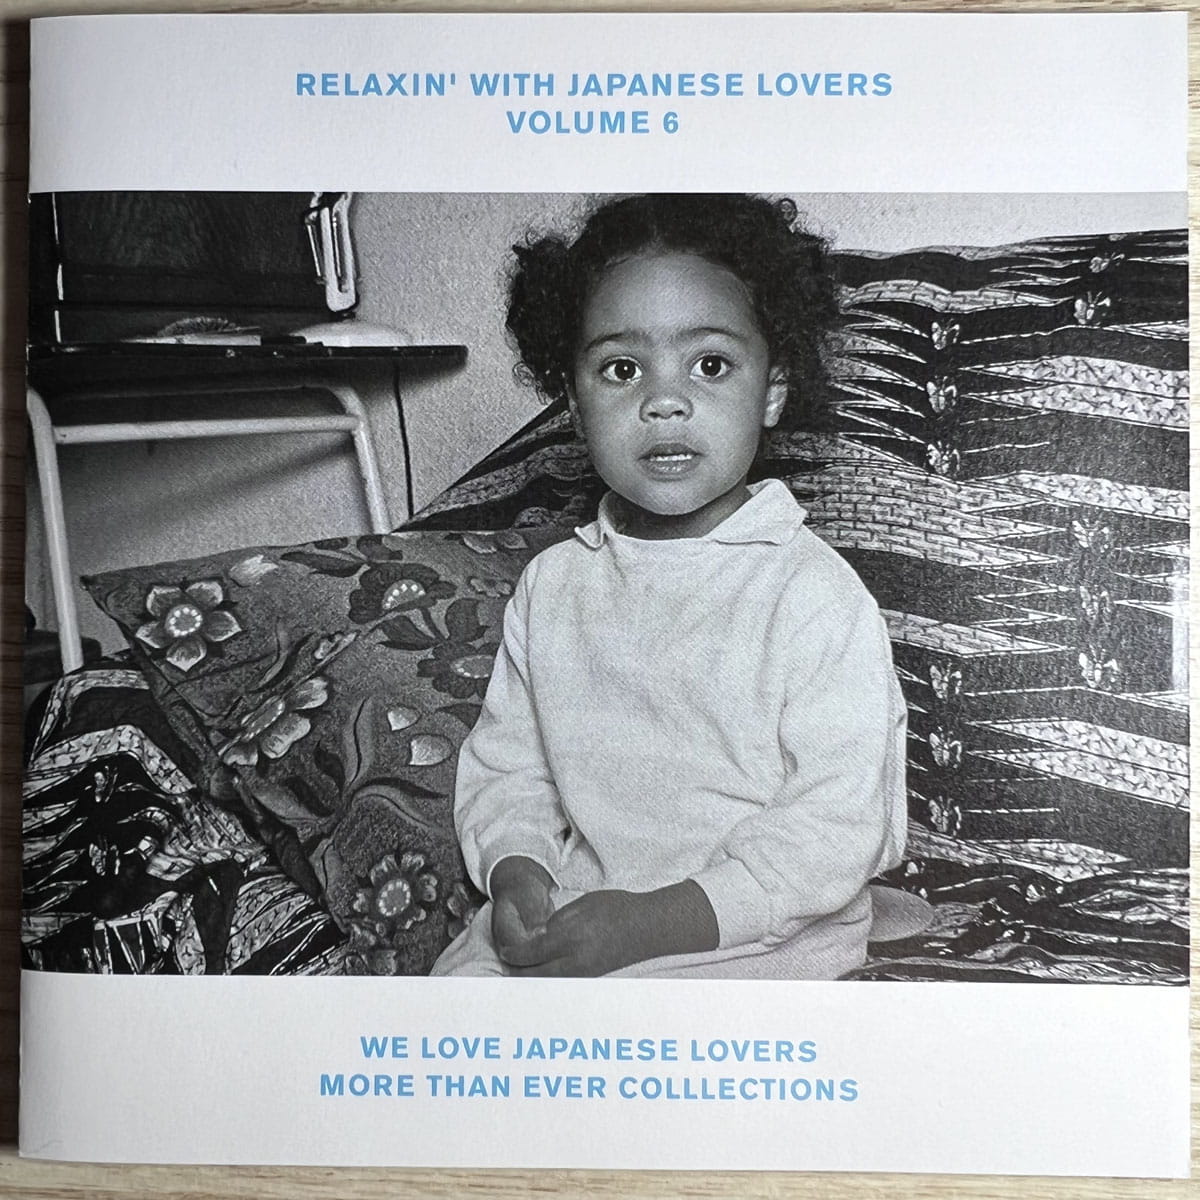 CD】V.A. / RELAXIN' WITH JAPANESE LOVERS VOL. 6 – YARDIES SHACK 